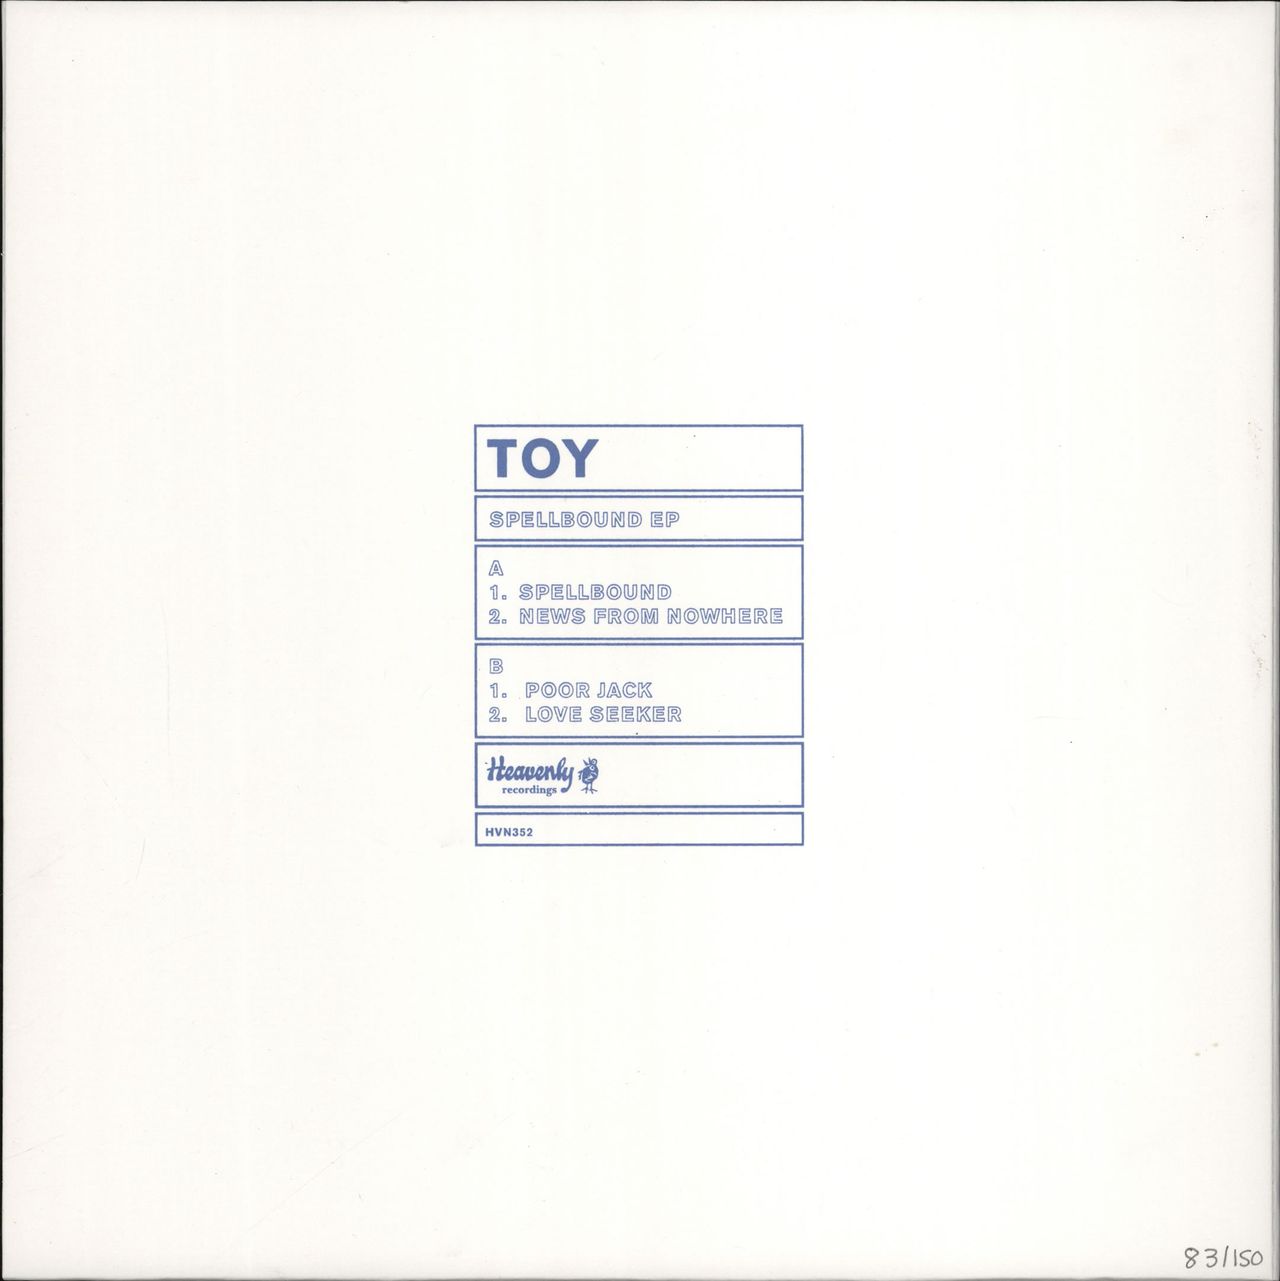 Toy Spellbound E.P - Numbered UK 12" vinyl single (12 inch record / Maxi-single)